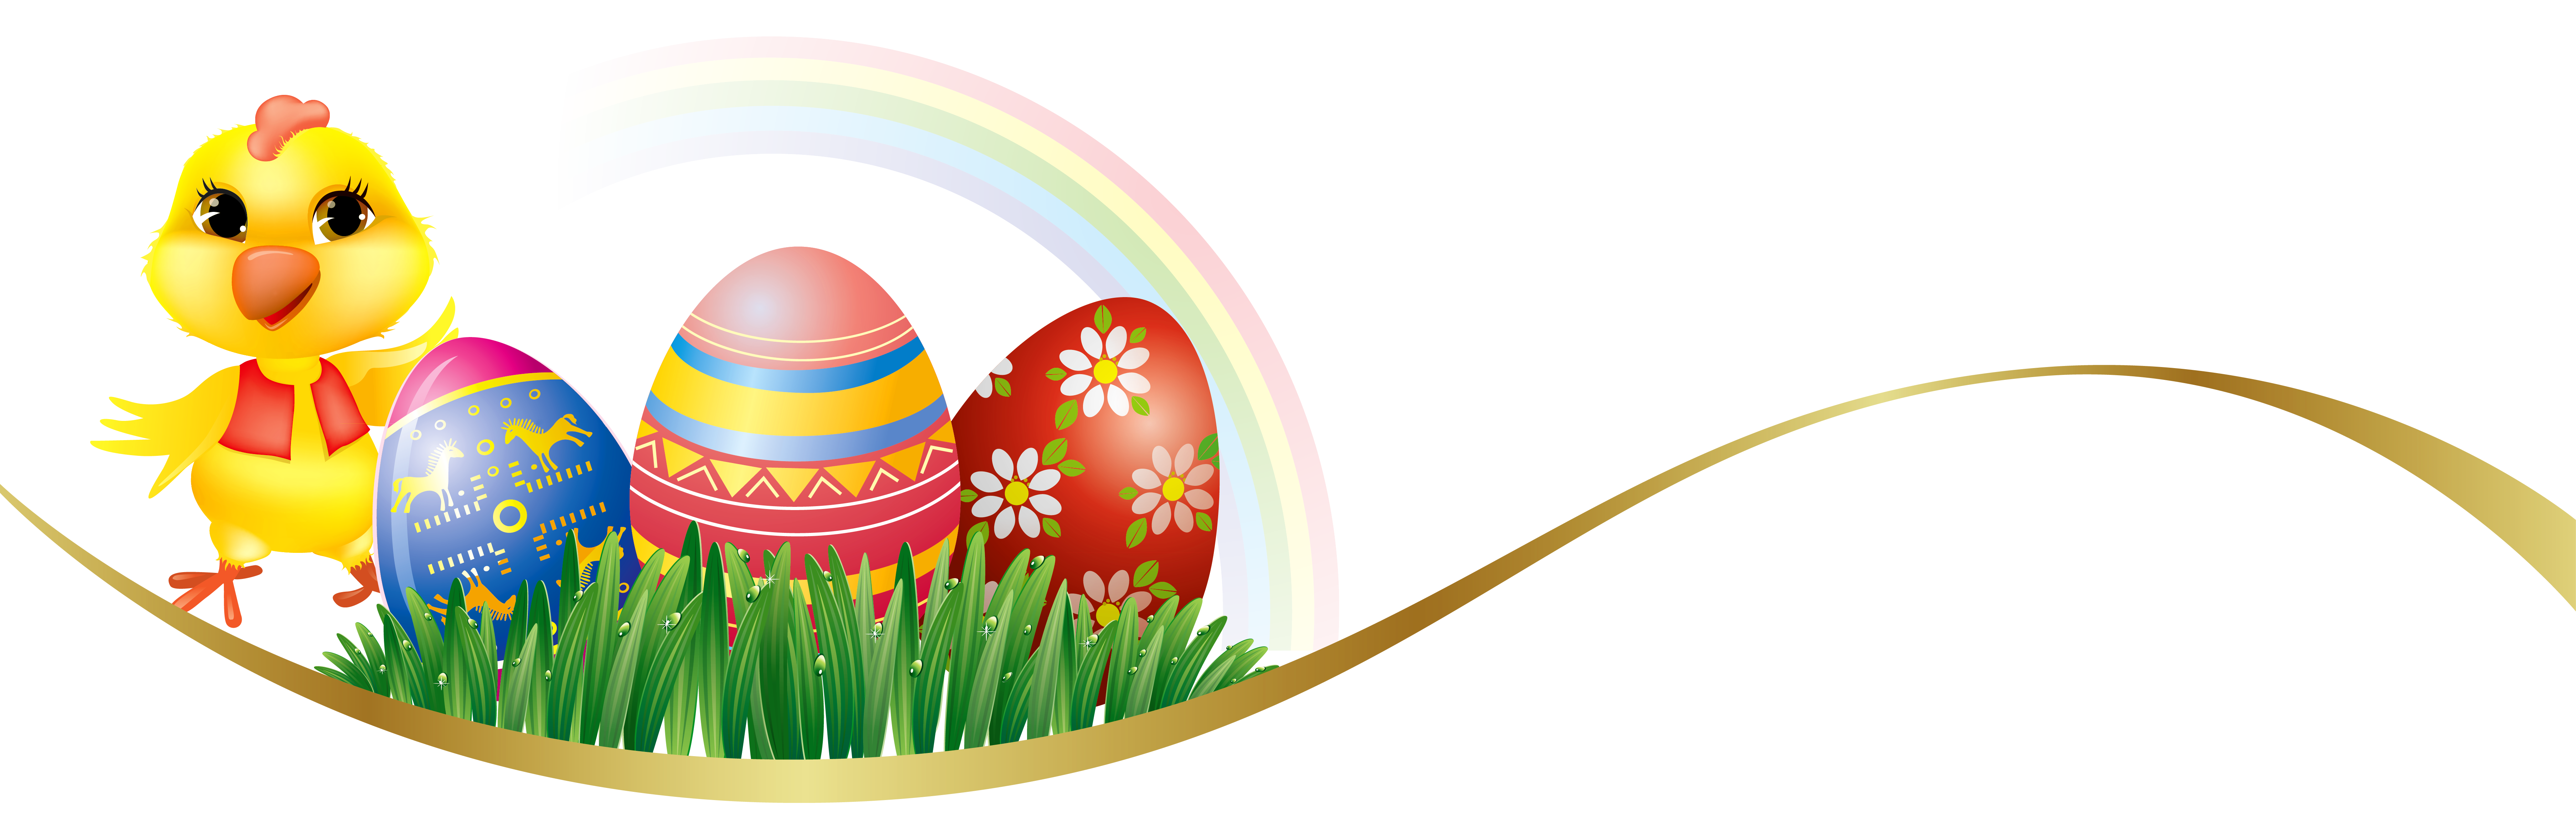 Easter Deco with Eggs and Chicken PNG Clipart Picture.